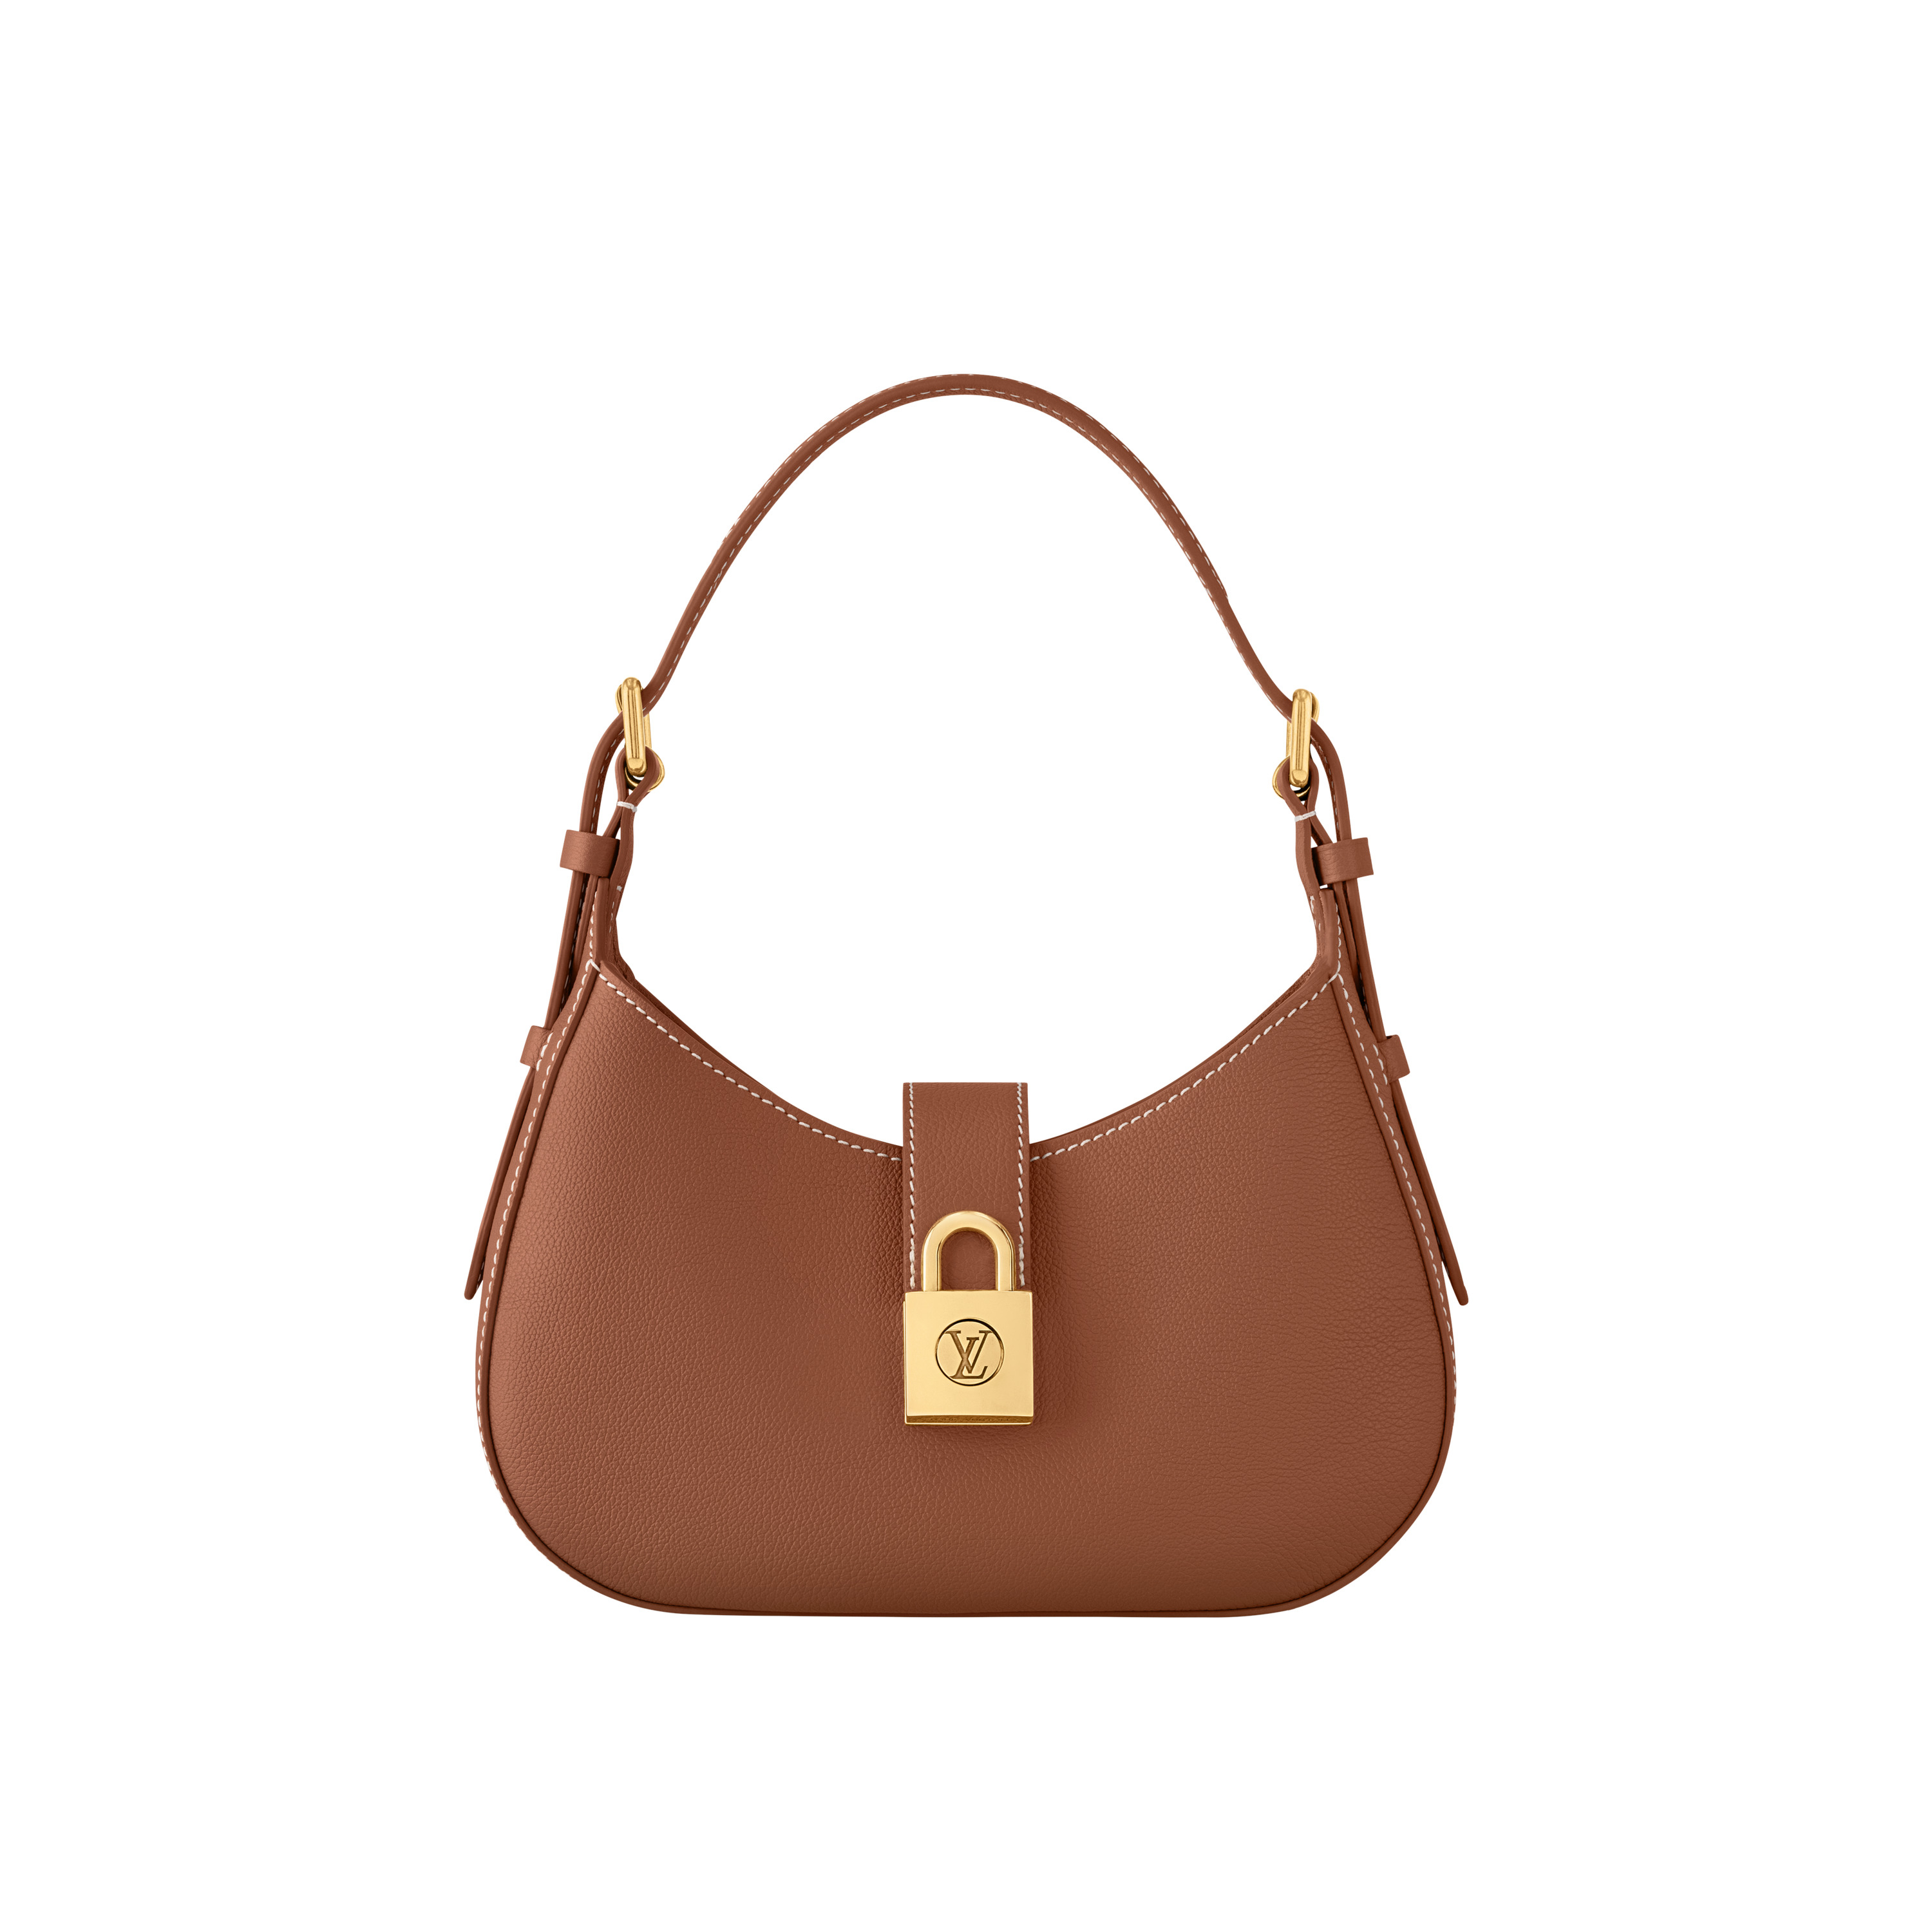 Louis Vuitton shoulder bag in brown with a gold lock detail